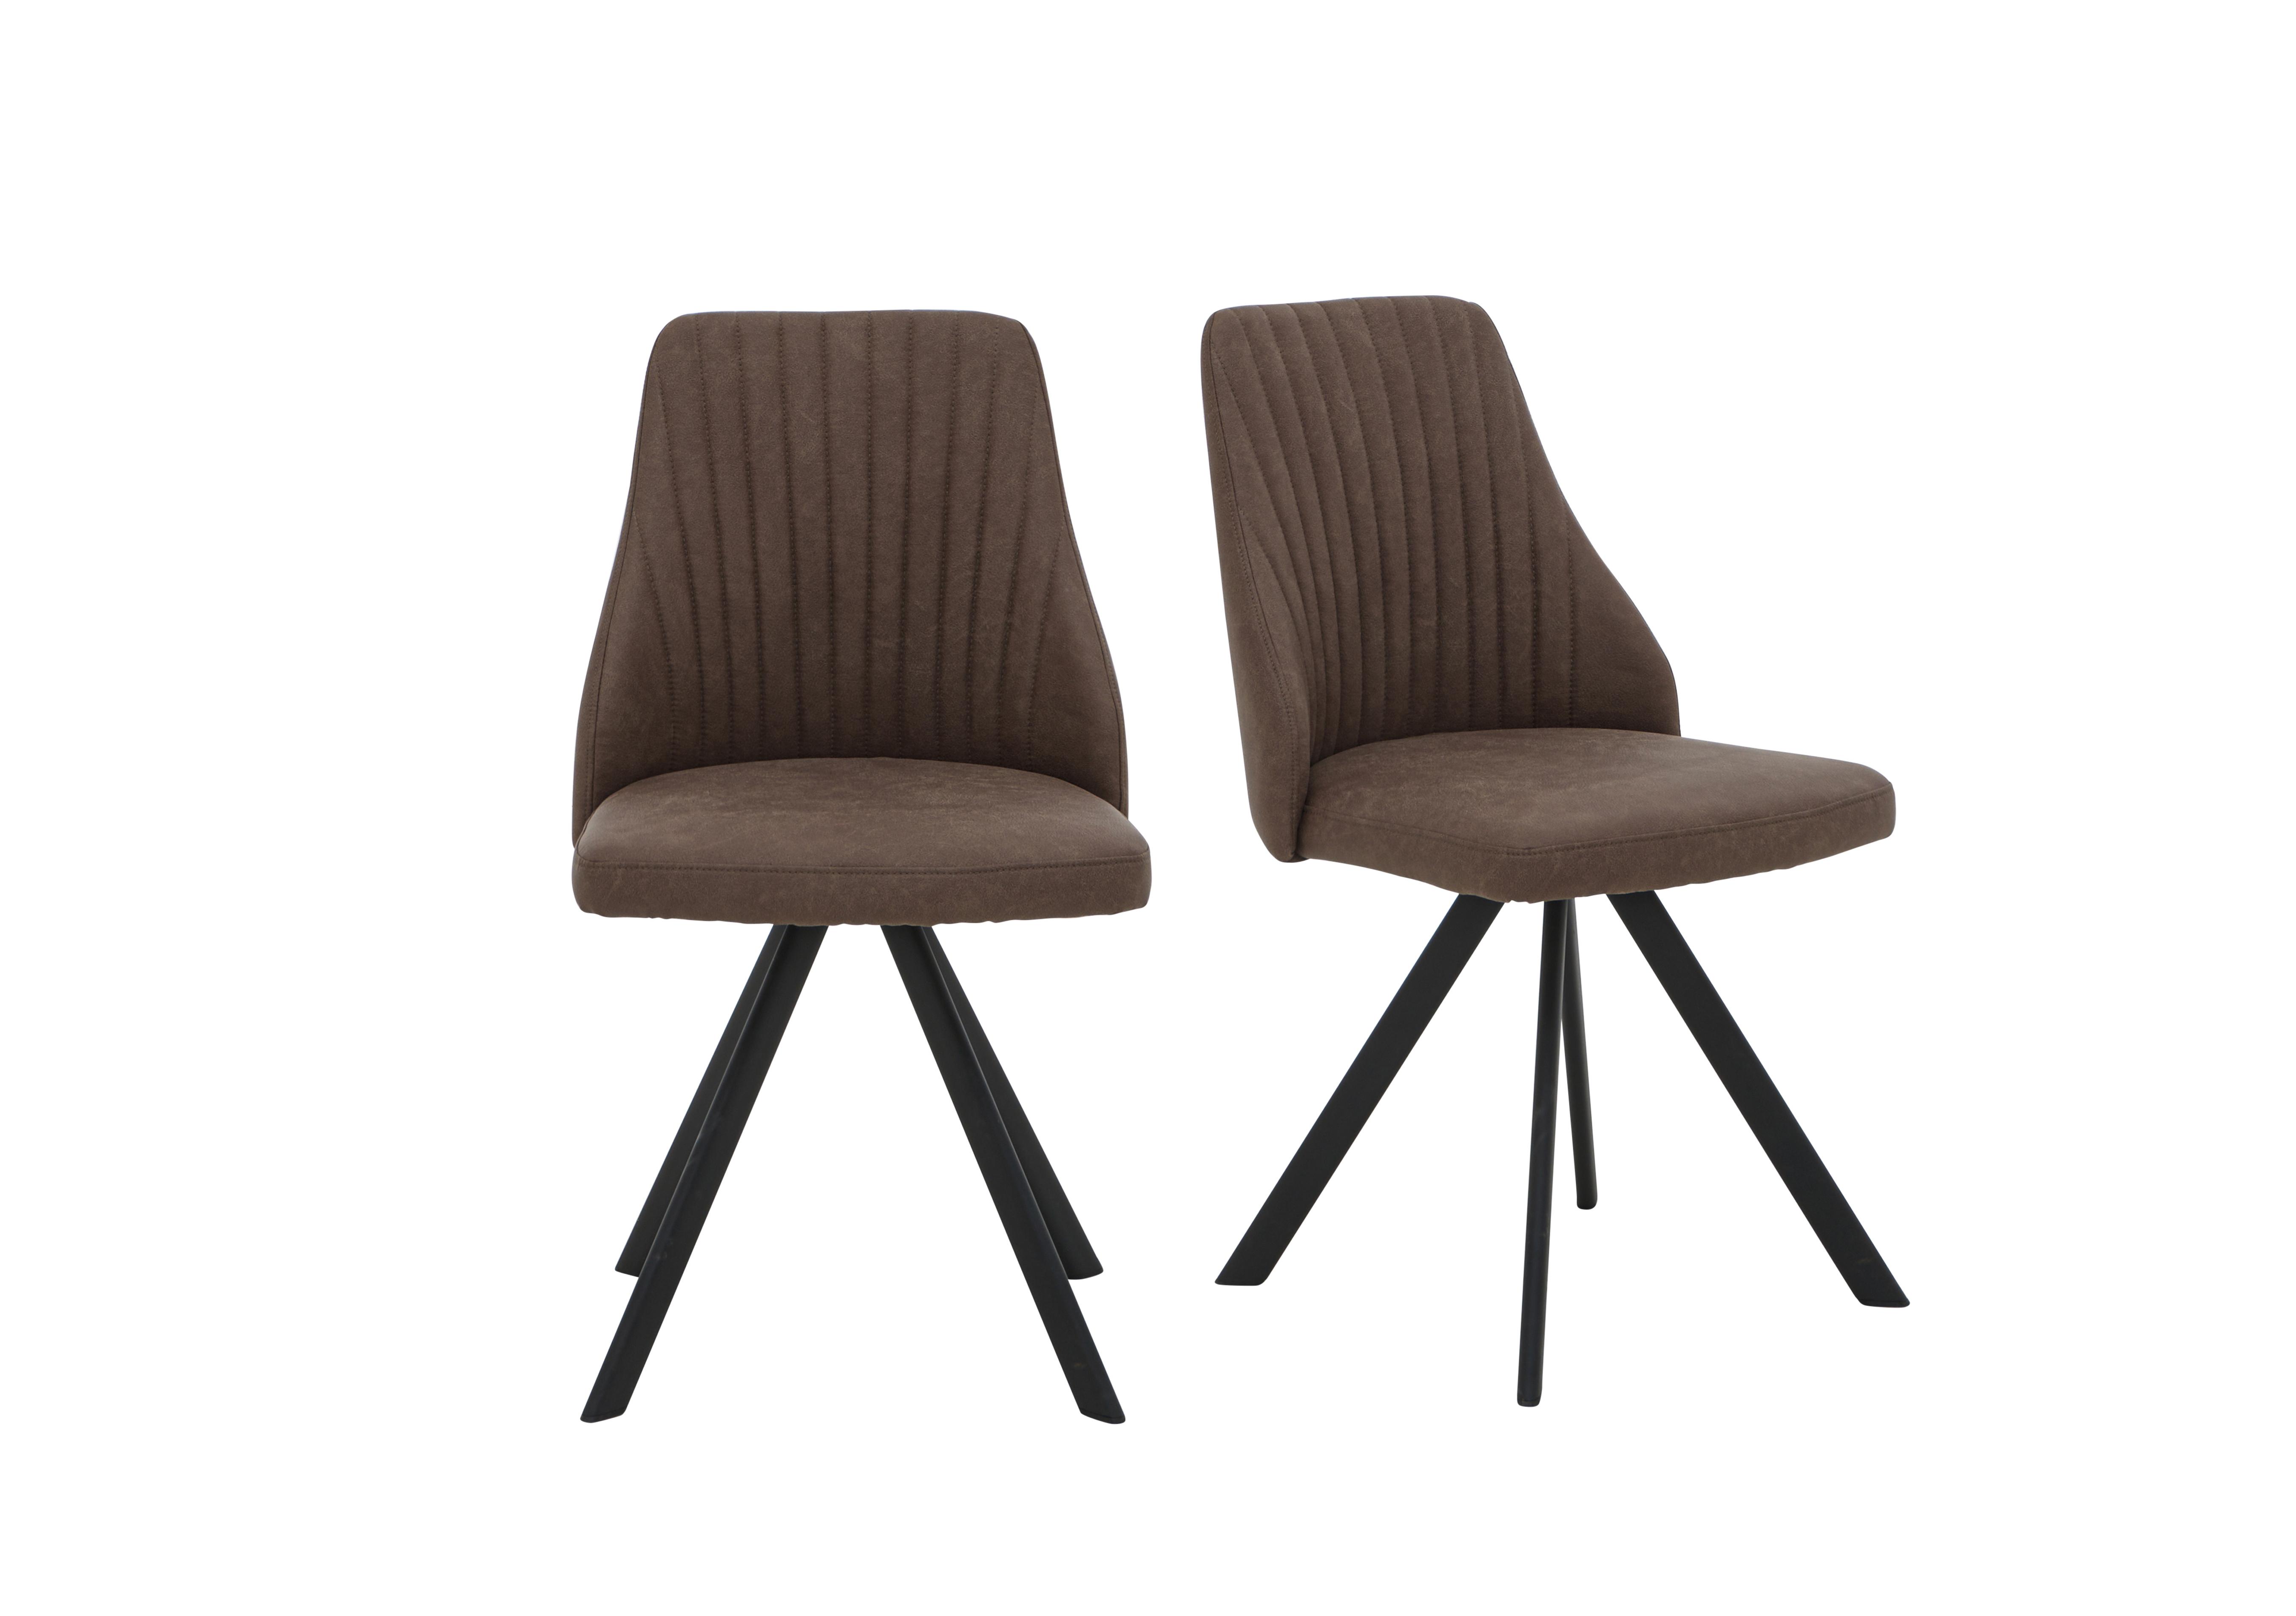 Aquila Pair of Swivel Dining Chairs in Brown Chairs on Furniture Village